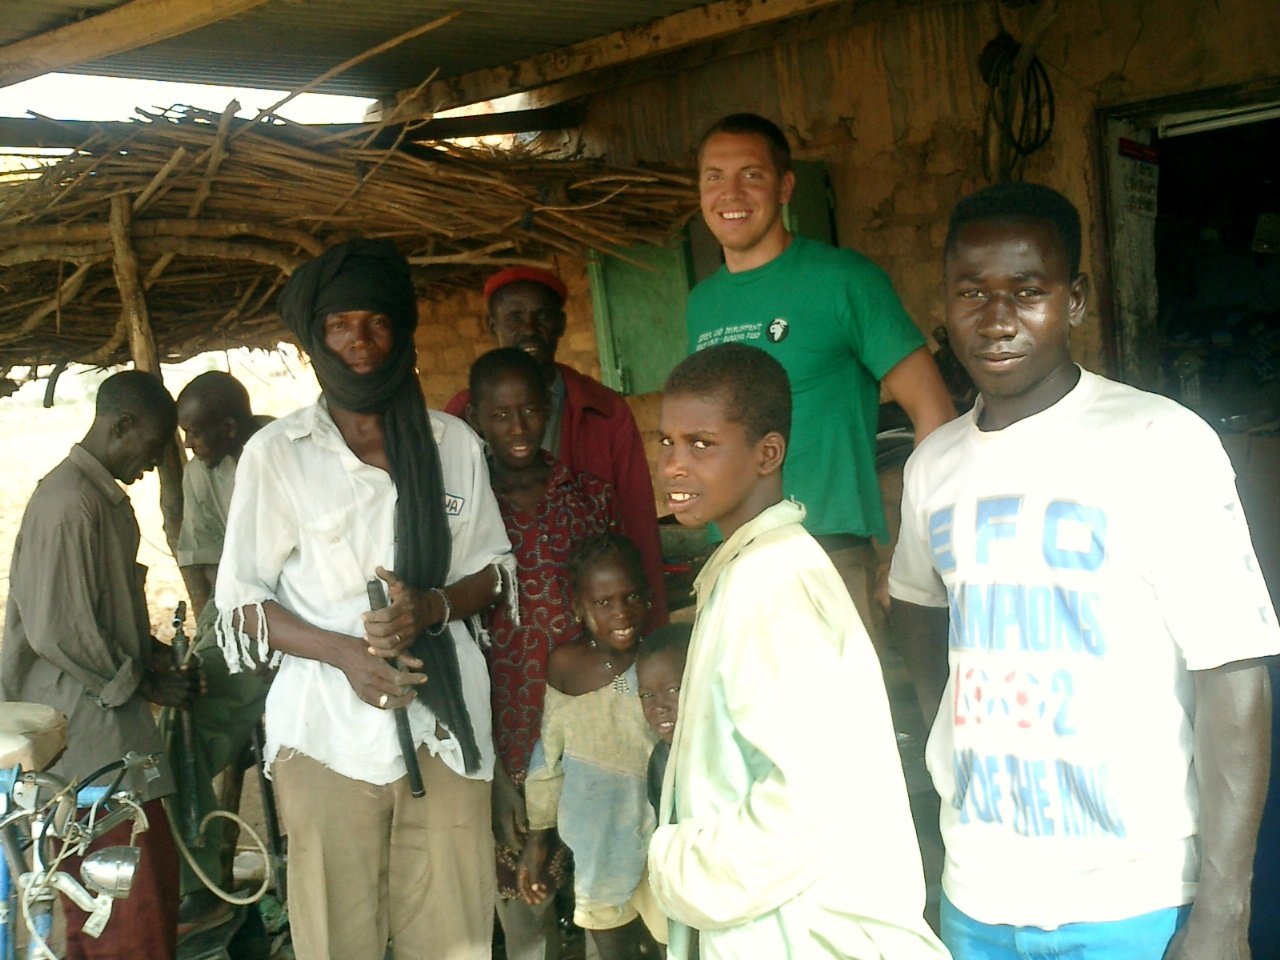 man standing with group of people in Burkina Faso